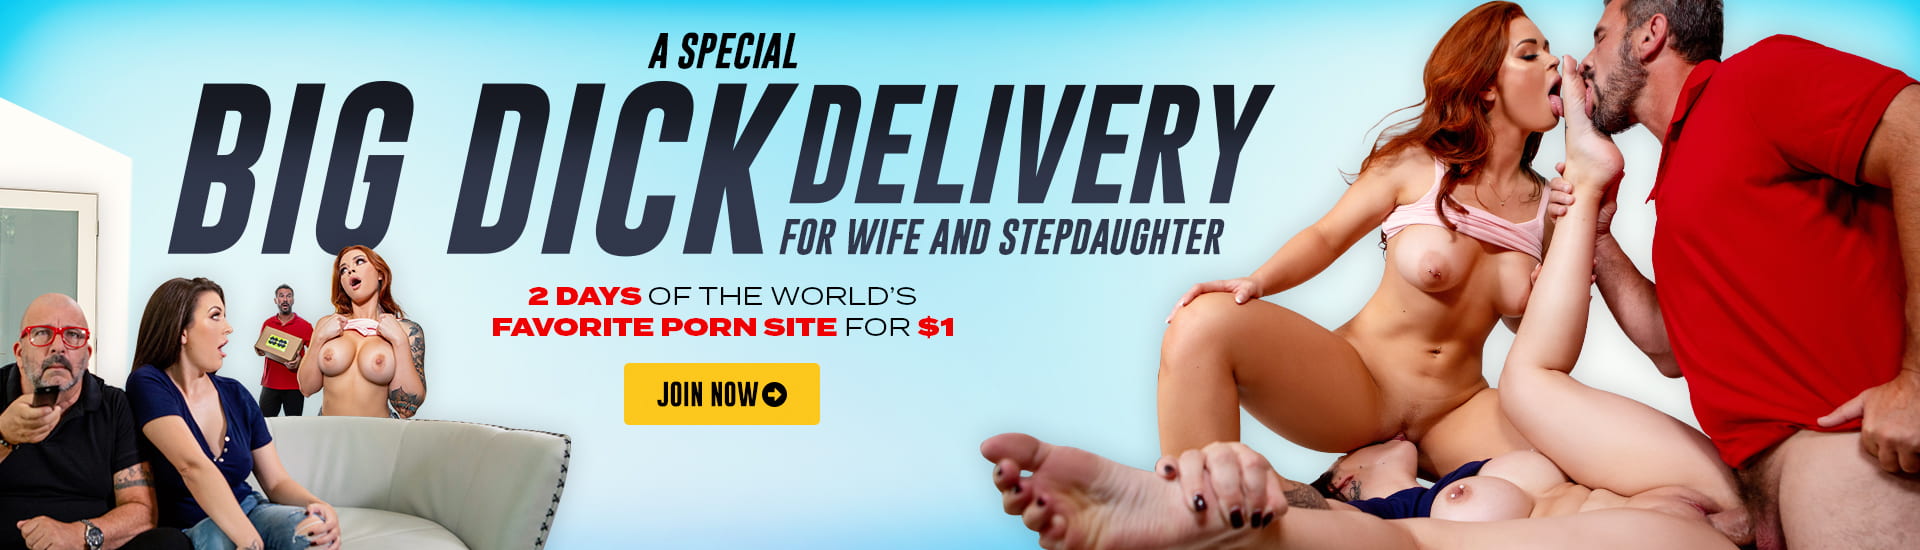 Big Dick Delivery Brazzers Banner